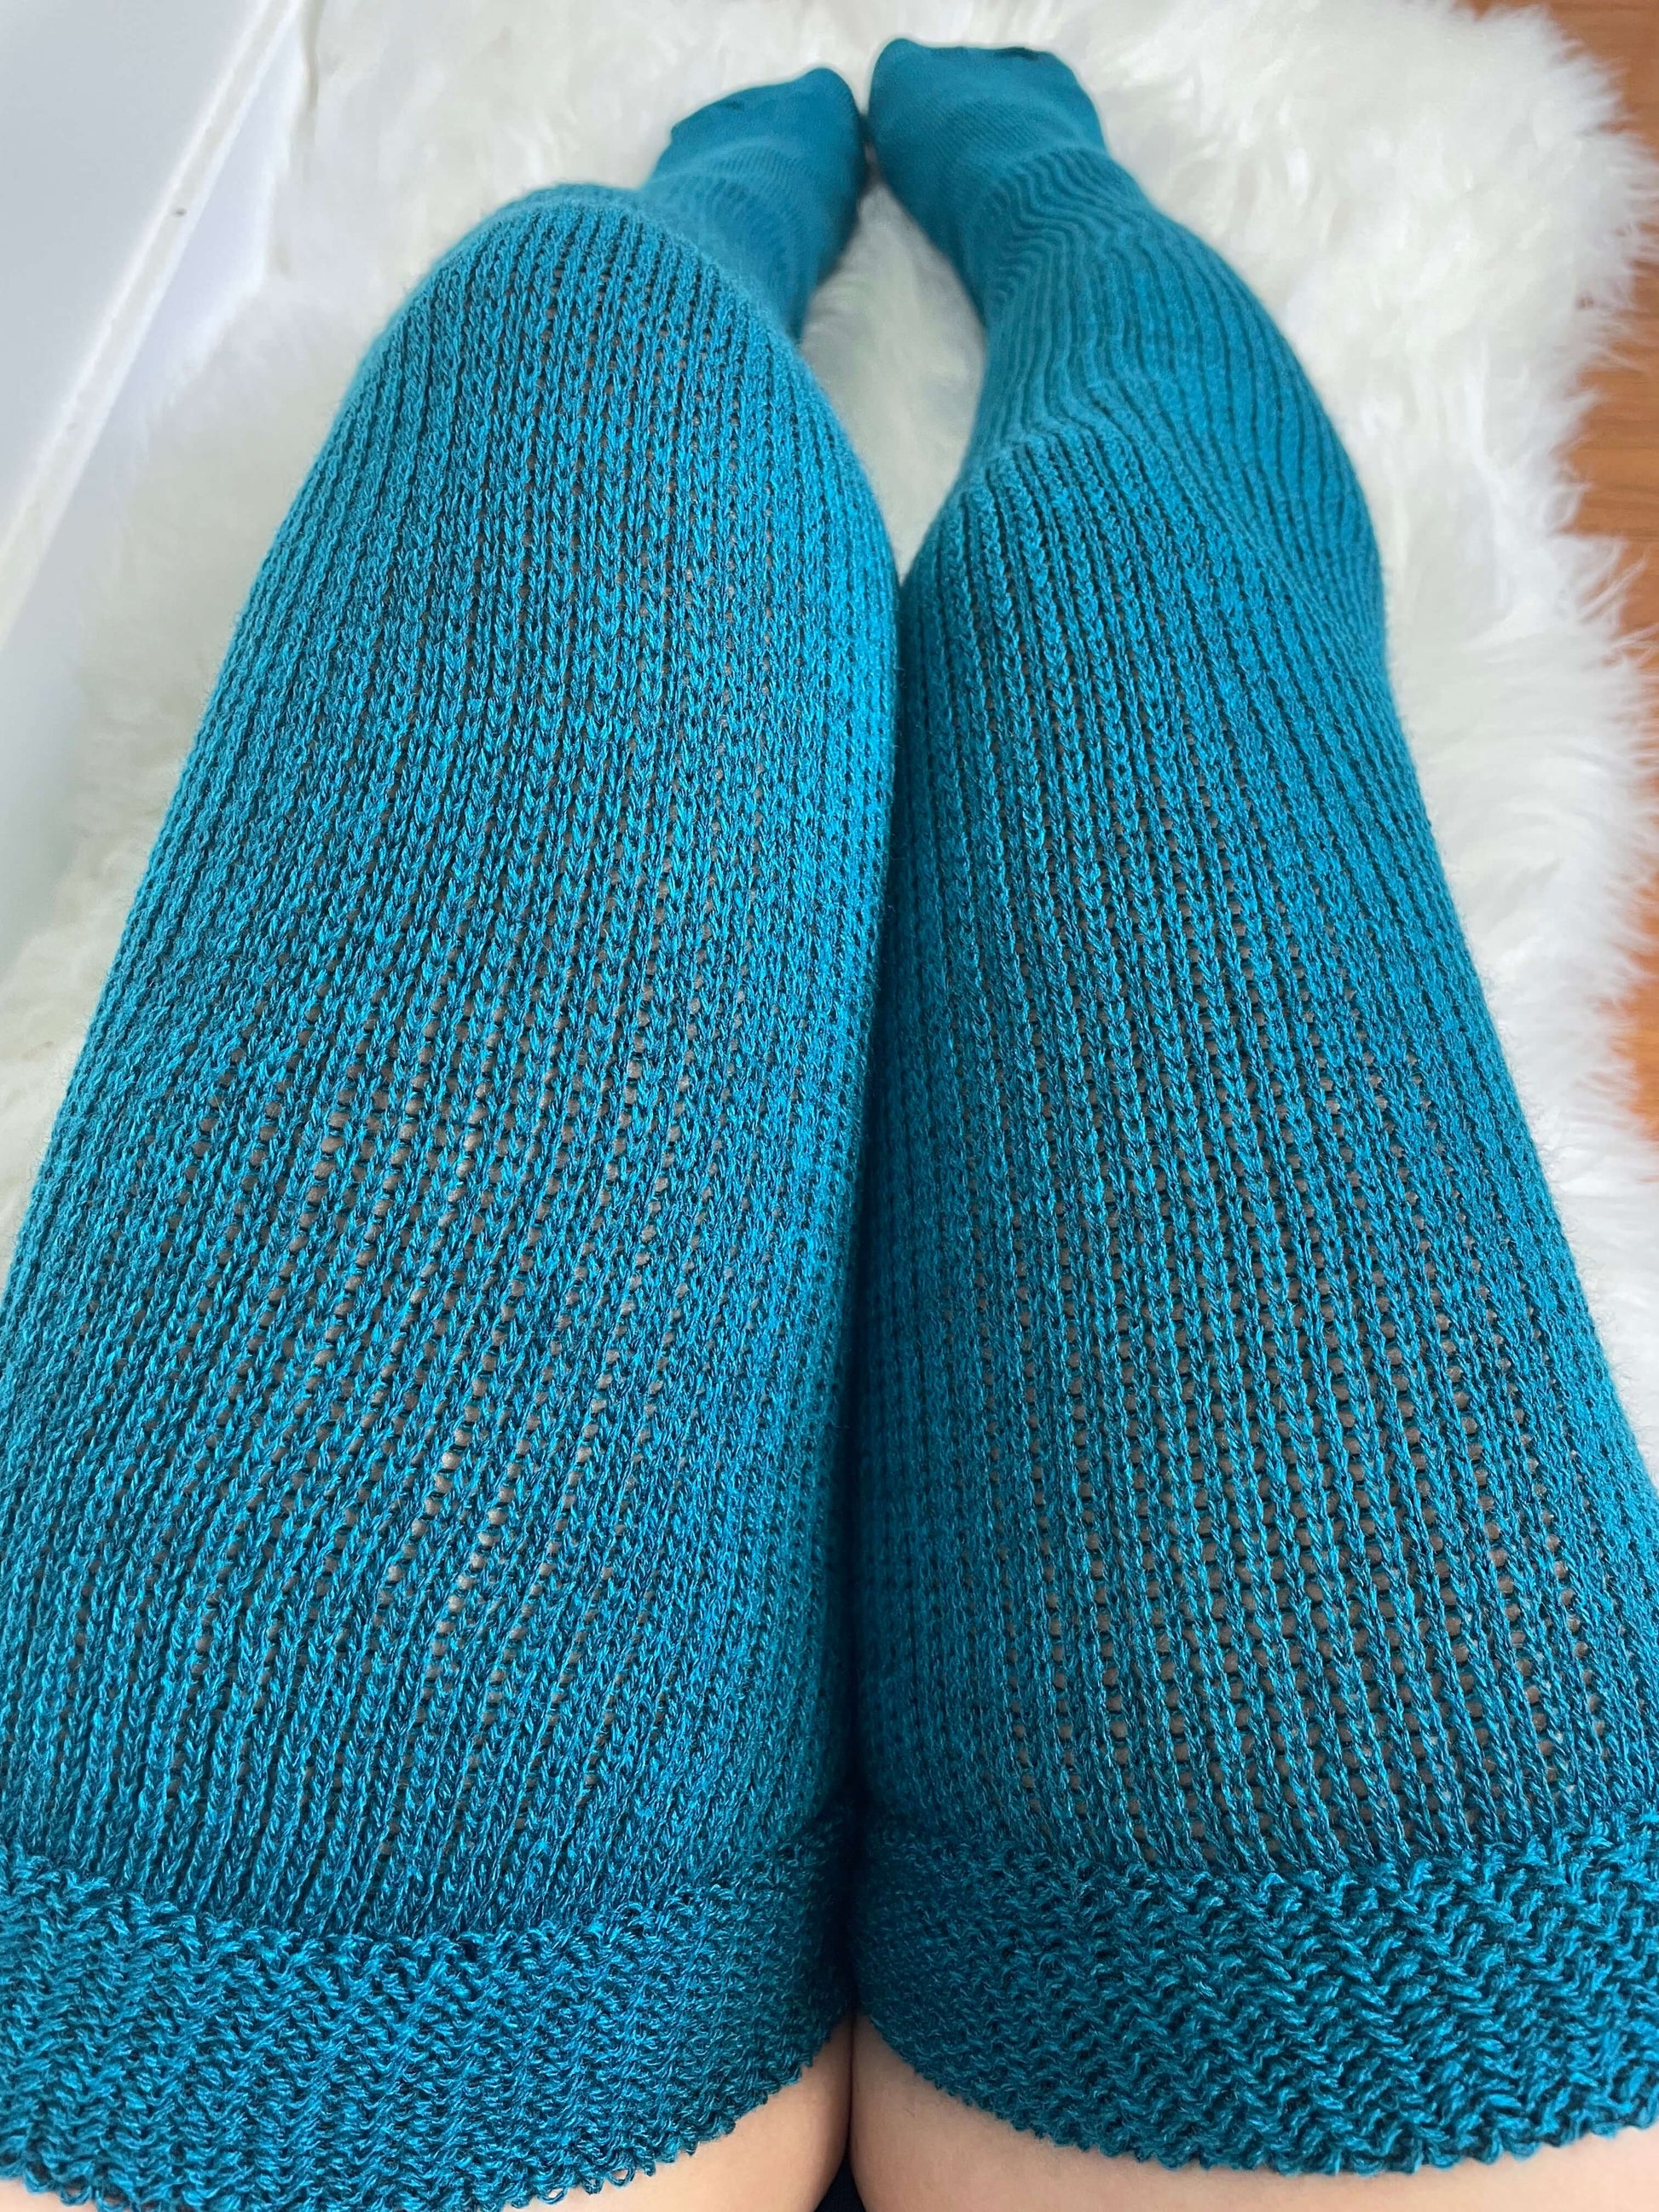 showcasing thigh high socks in a lovely teal hue, a chic and trendy addition to any plus size wardrobe.